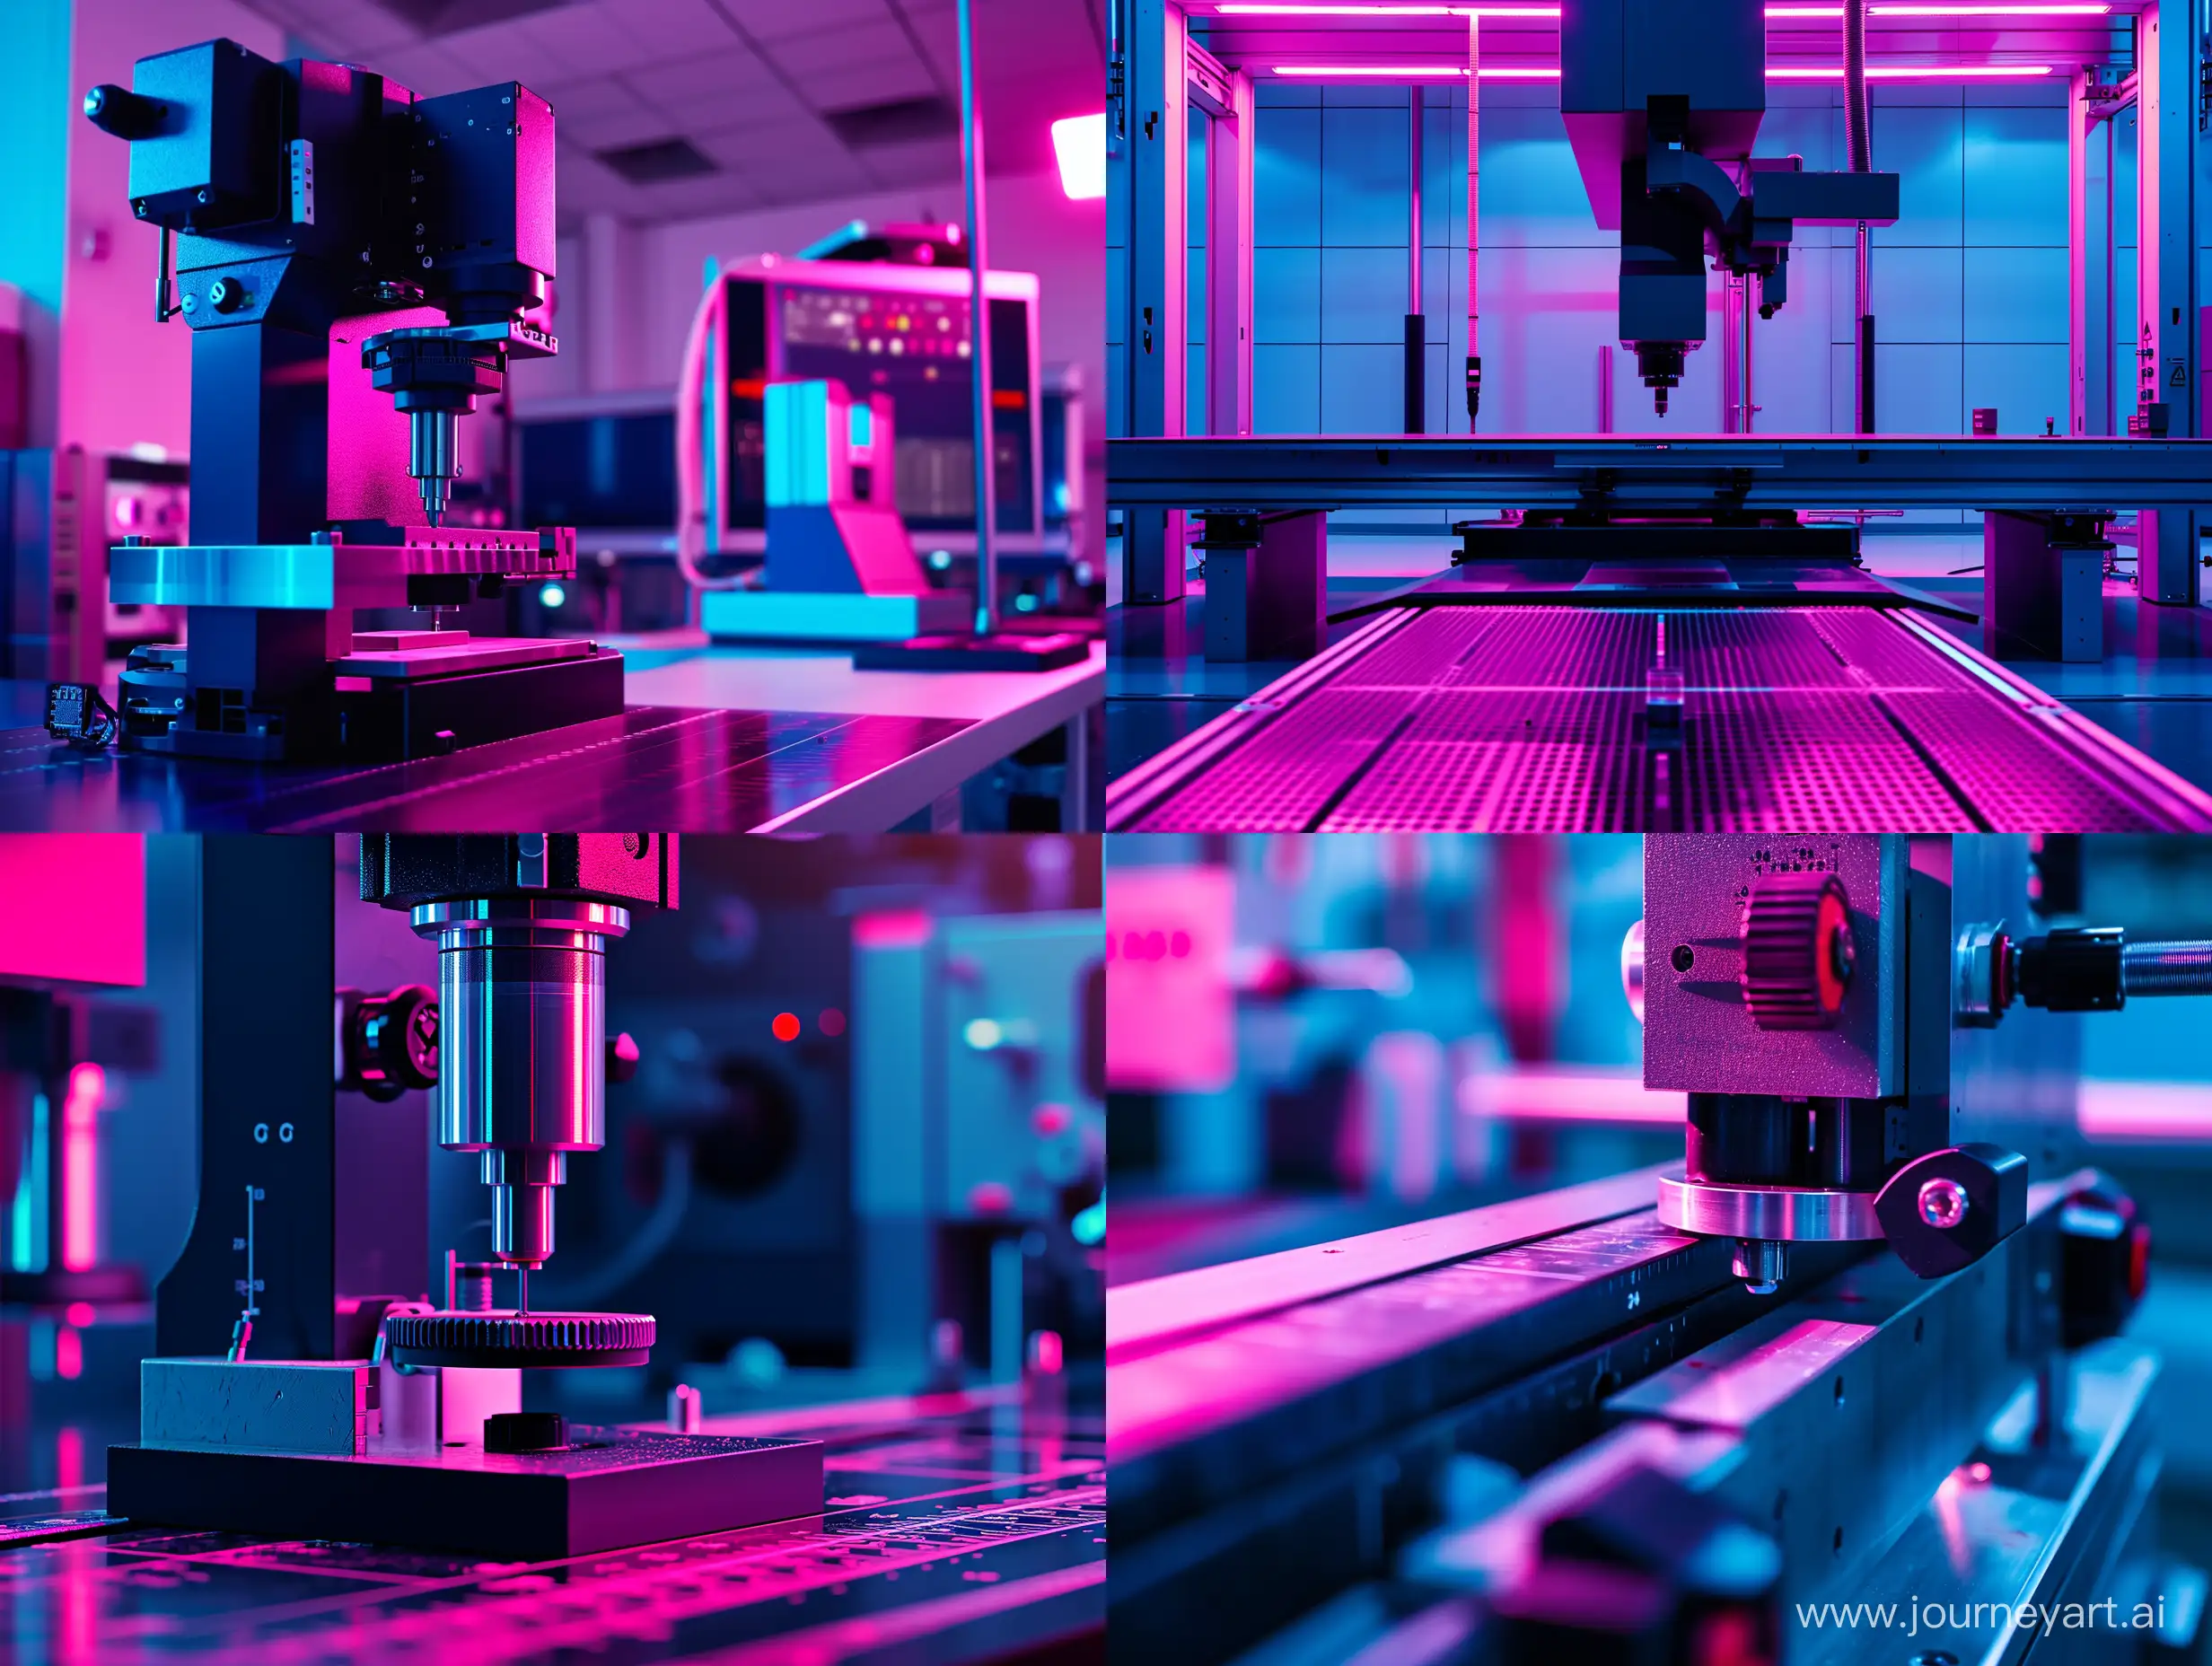 One marketing photo from the field of metrology in magenta and dark blue colors.